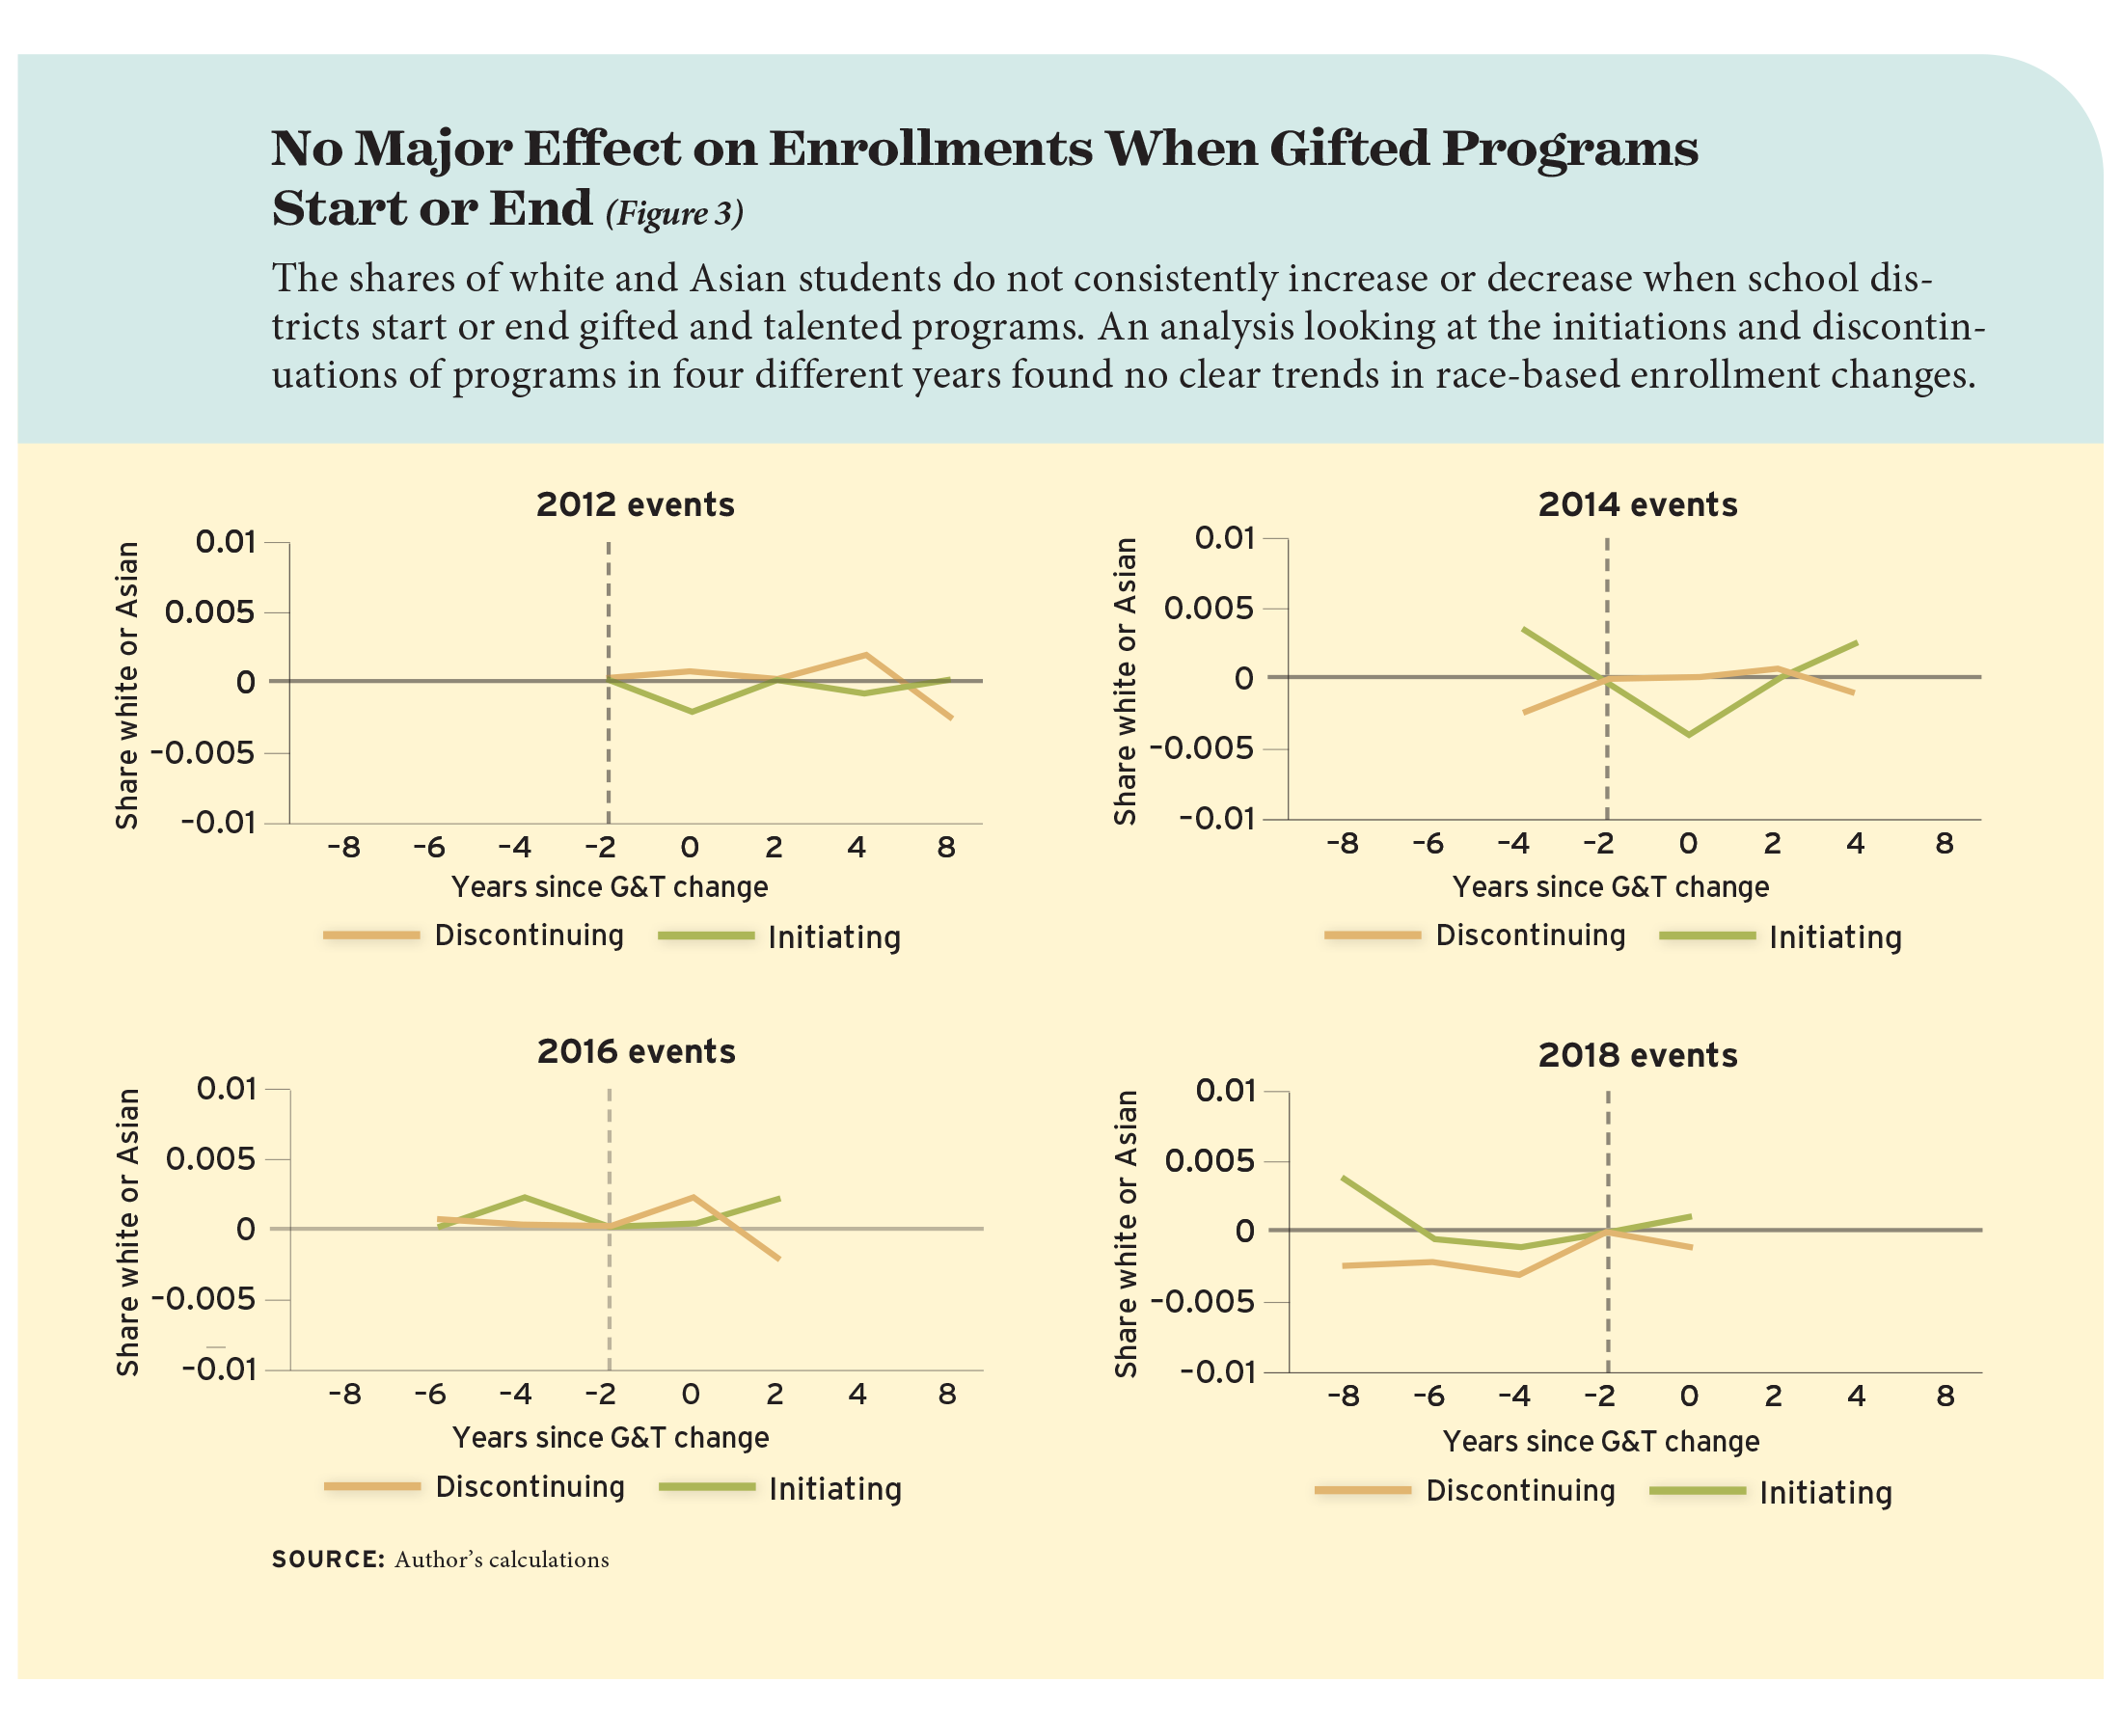 No Major Effect on Enrollments When Gifted Programs Start or End (Figure 3)